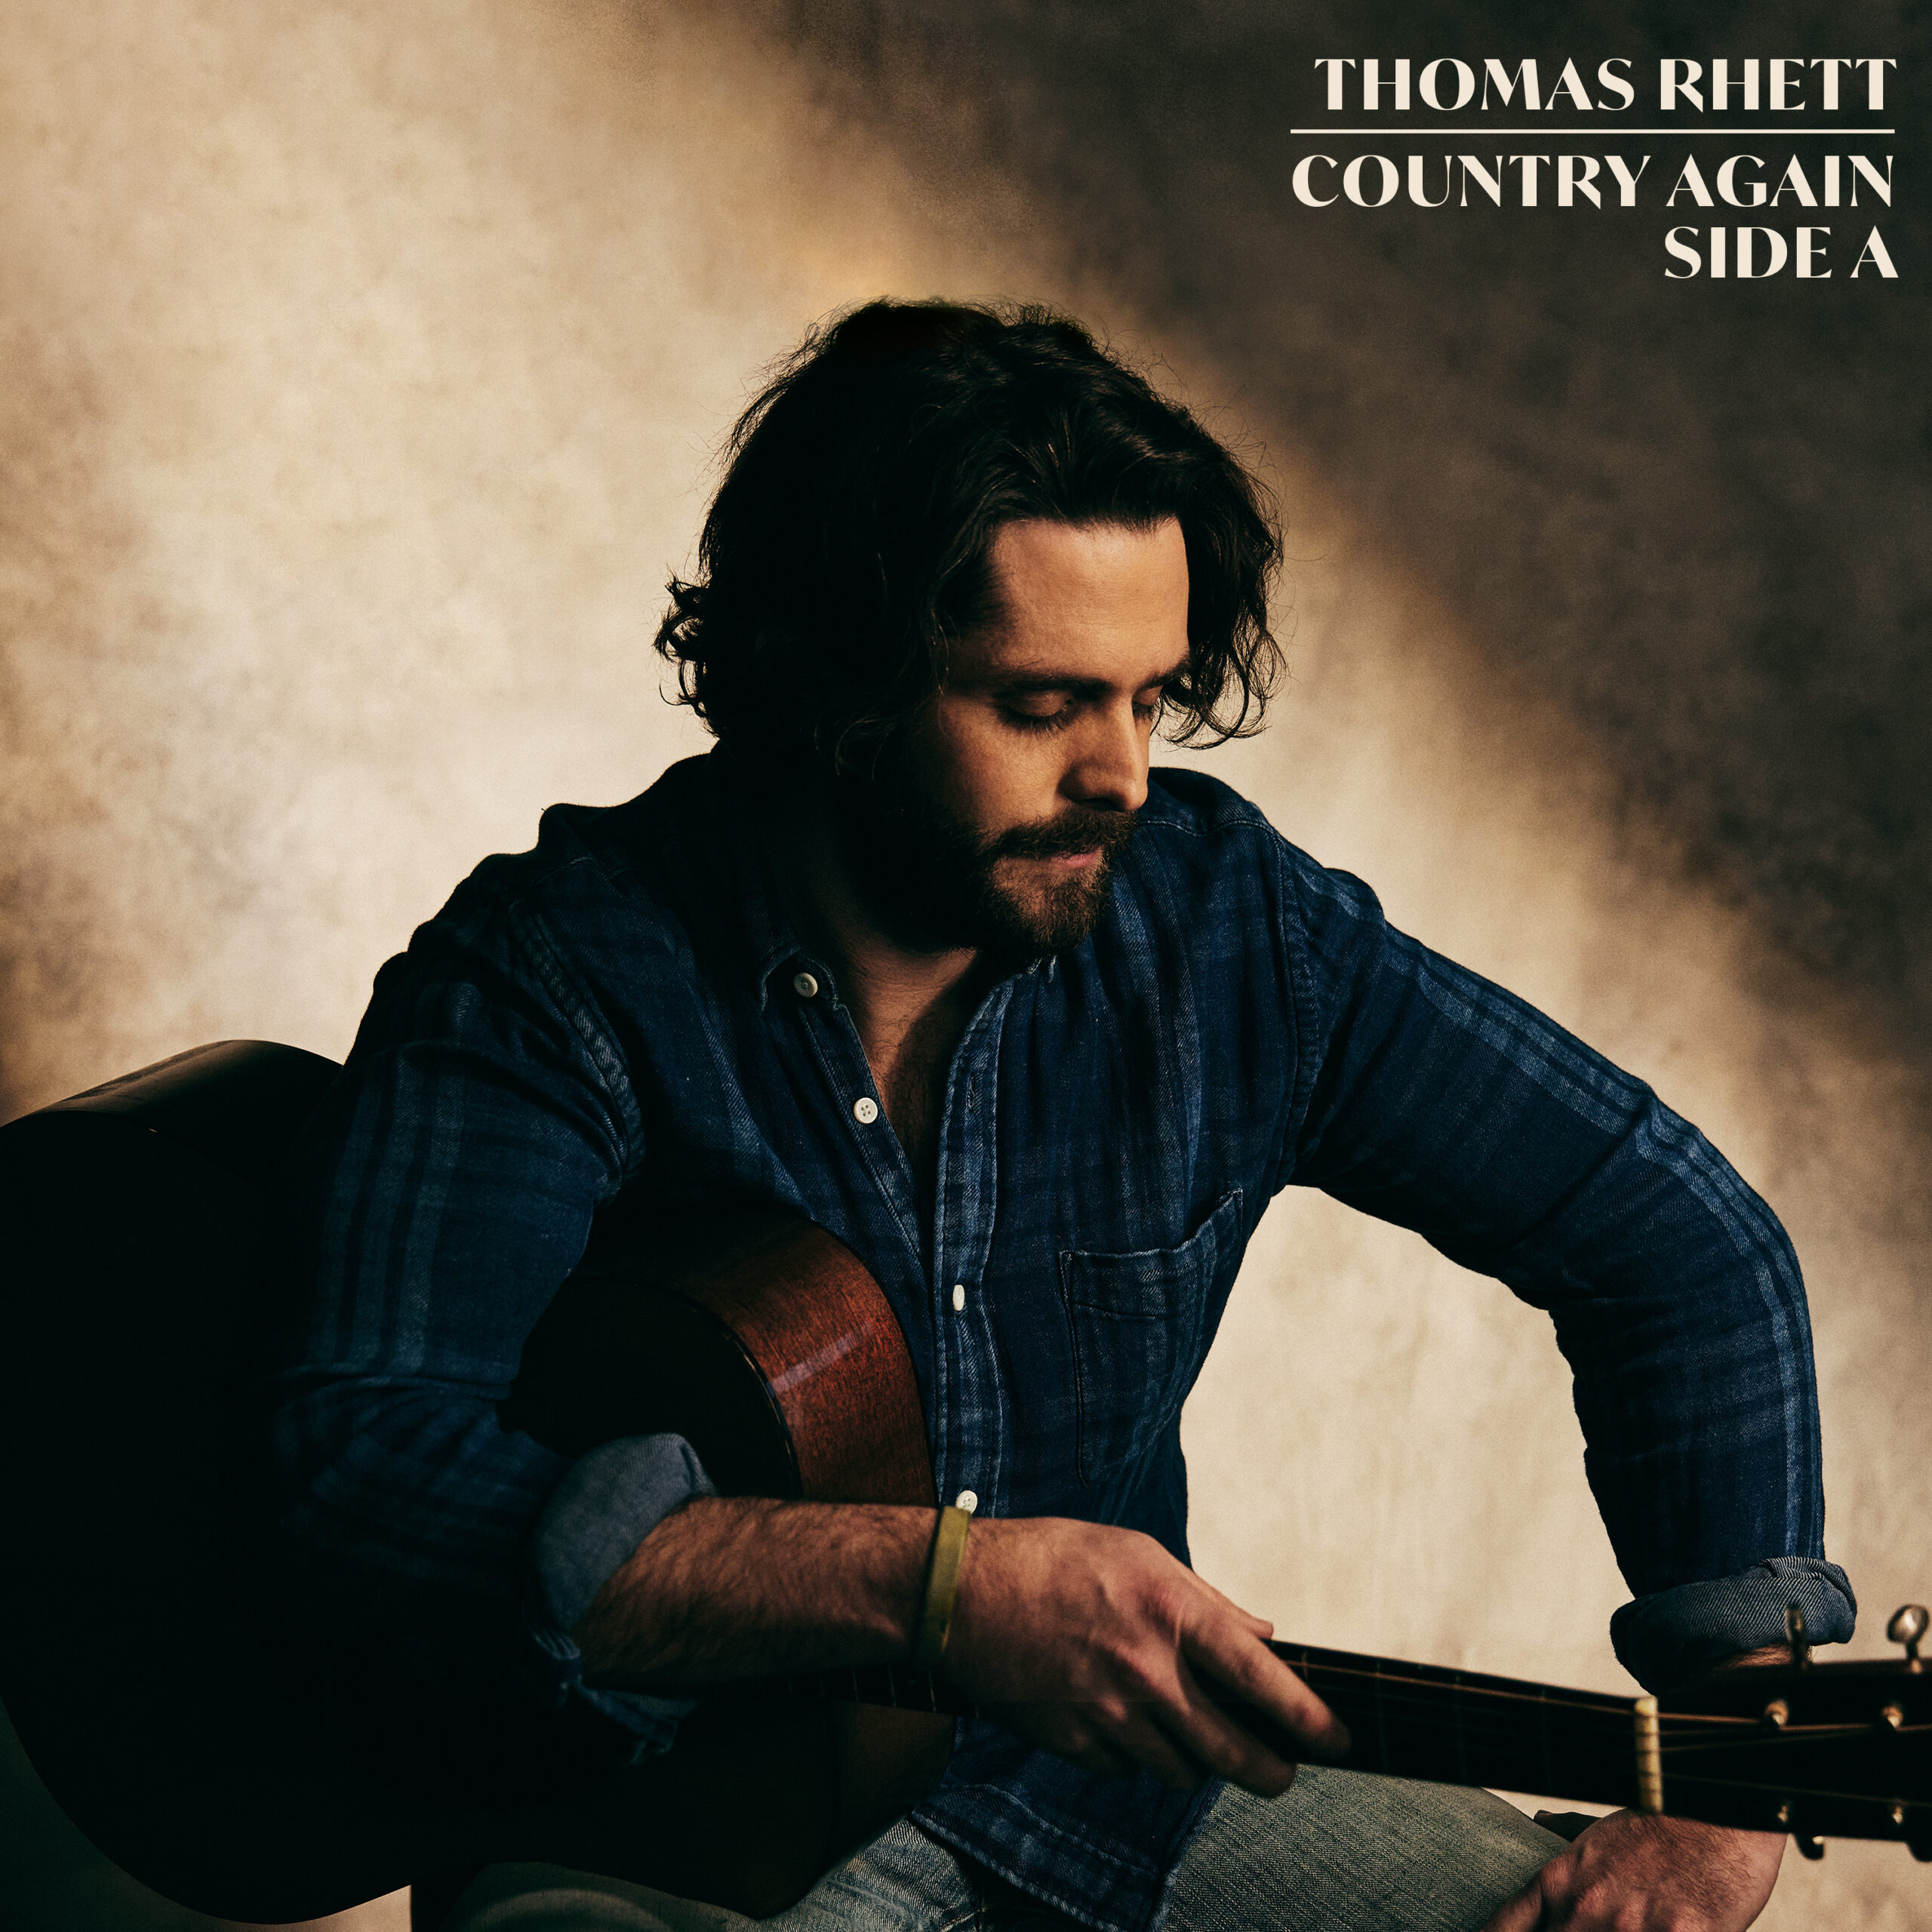 Thomas Rhett Releases New Single And Video from Upcoming Album ‘Country Again: Side A’